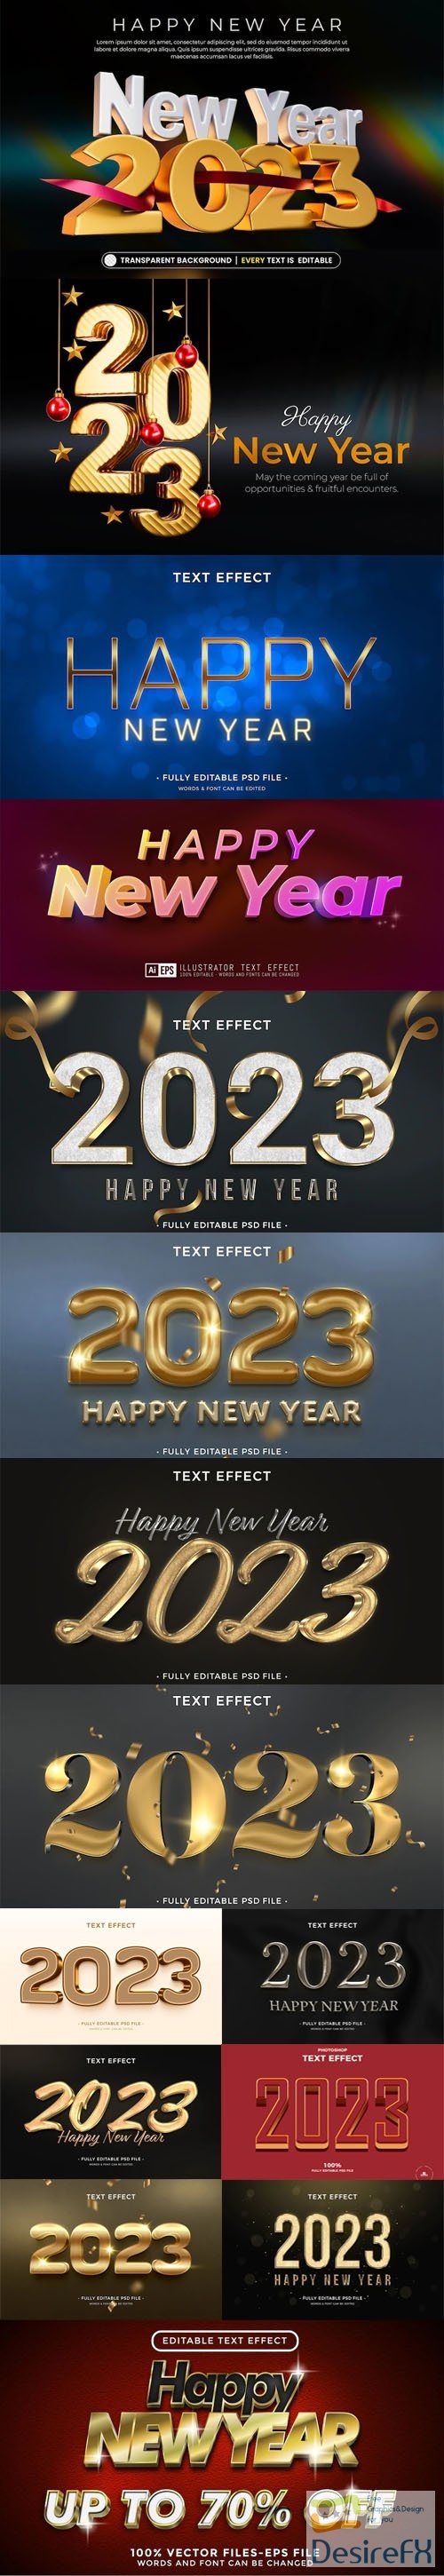 happy new year 2023 after effects template free download